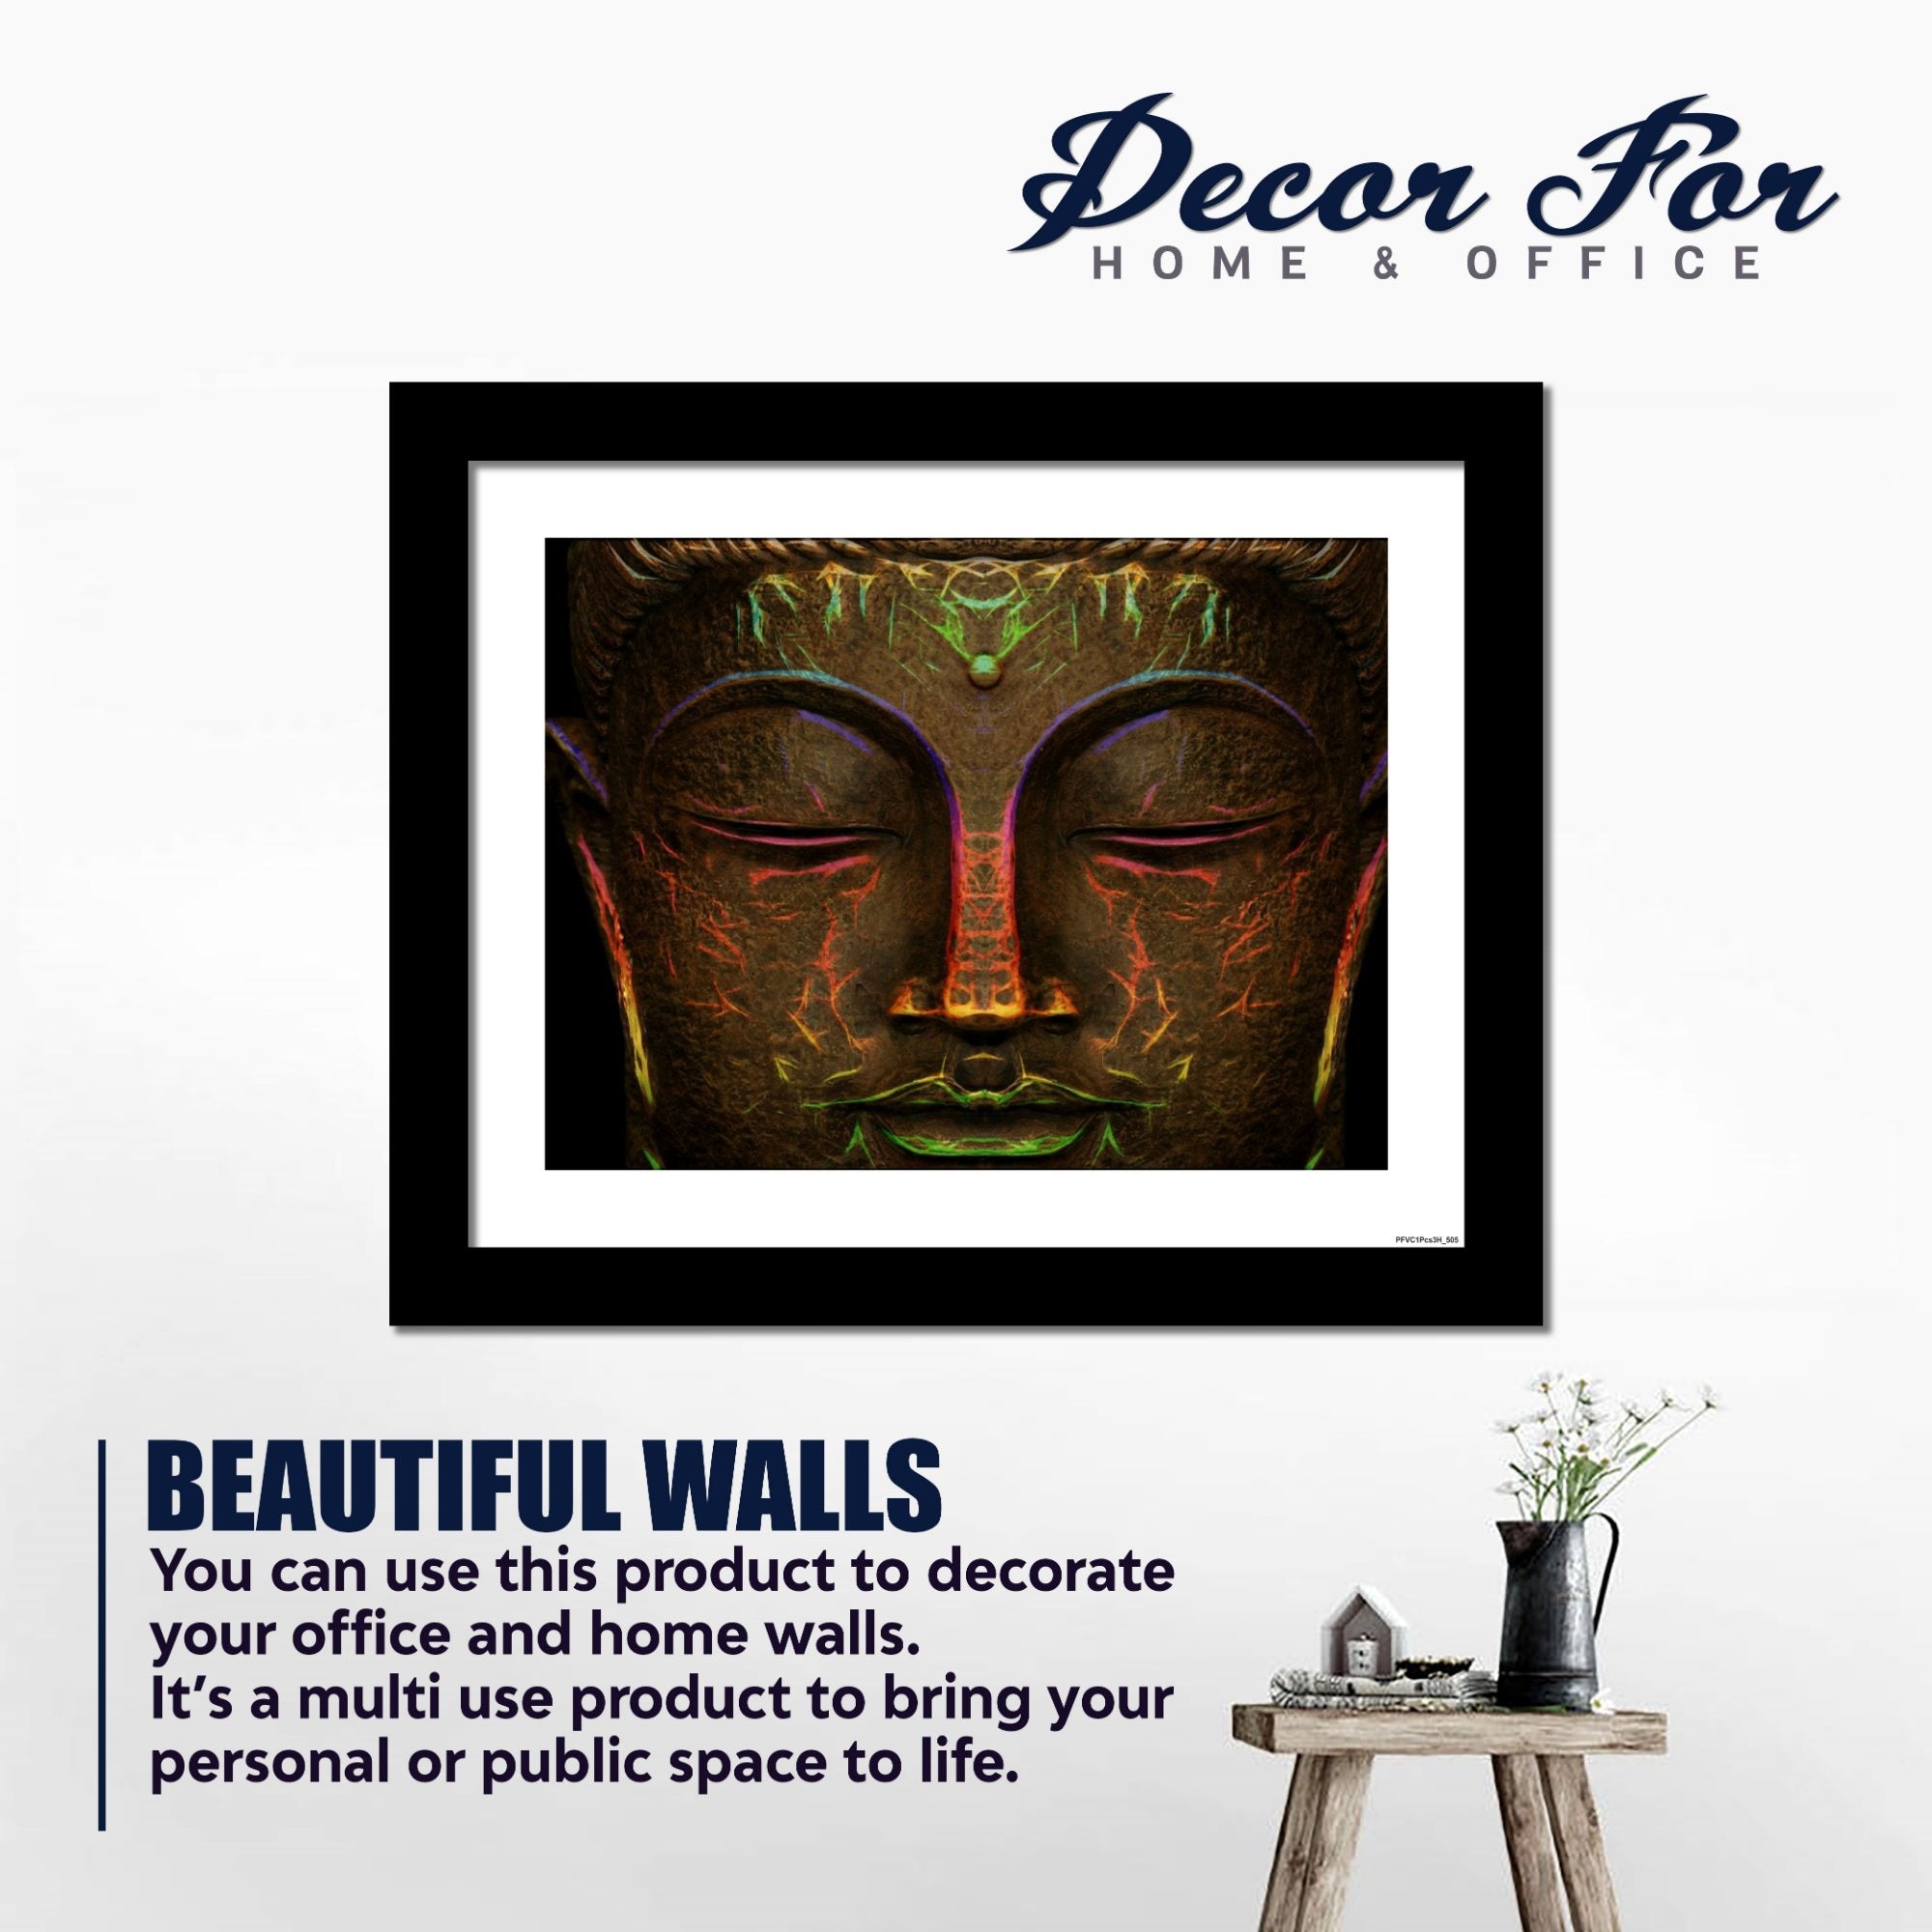 Quality Wall Frame Painting of Peaceful Lord Buddha Face